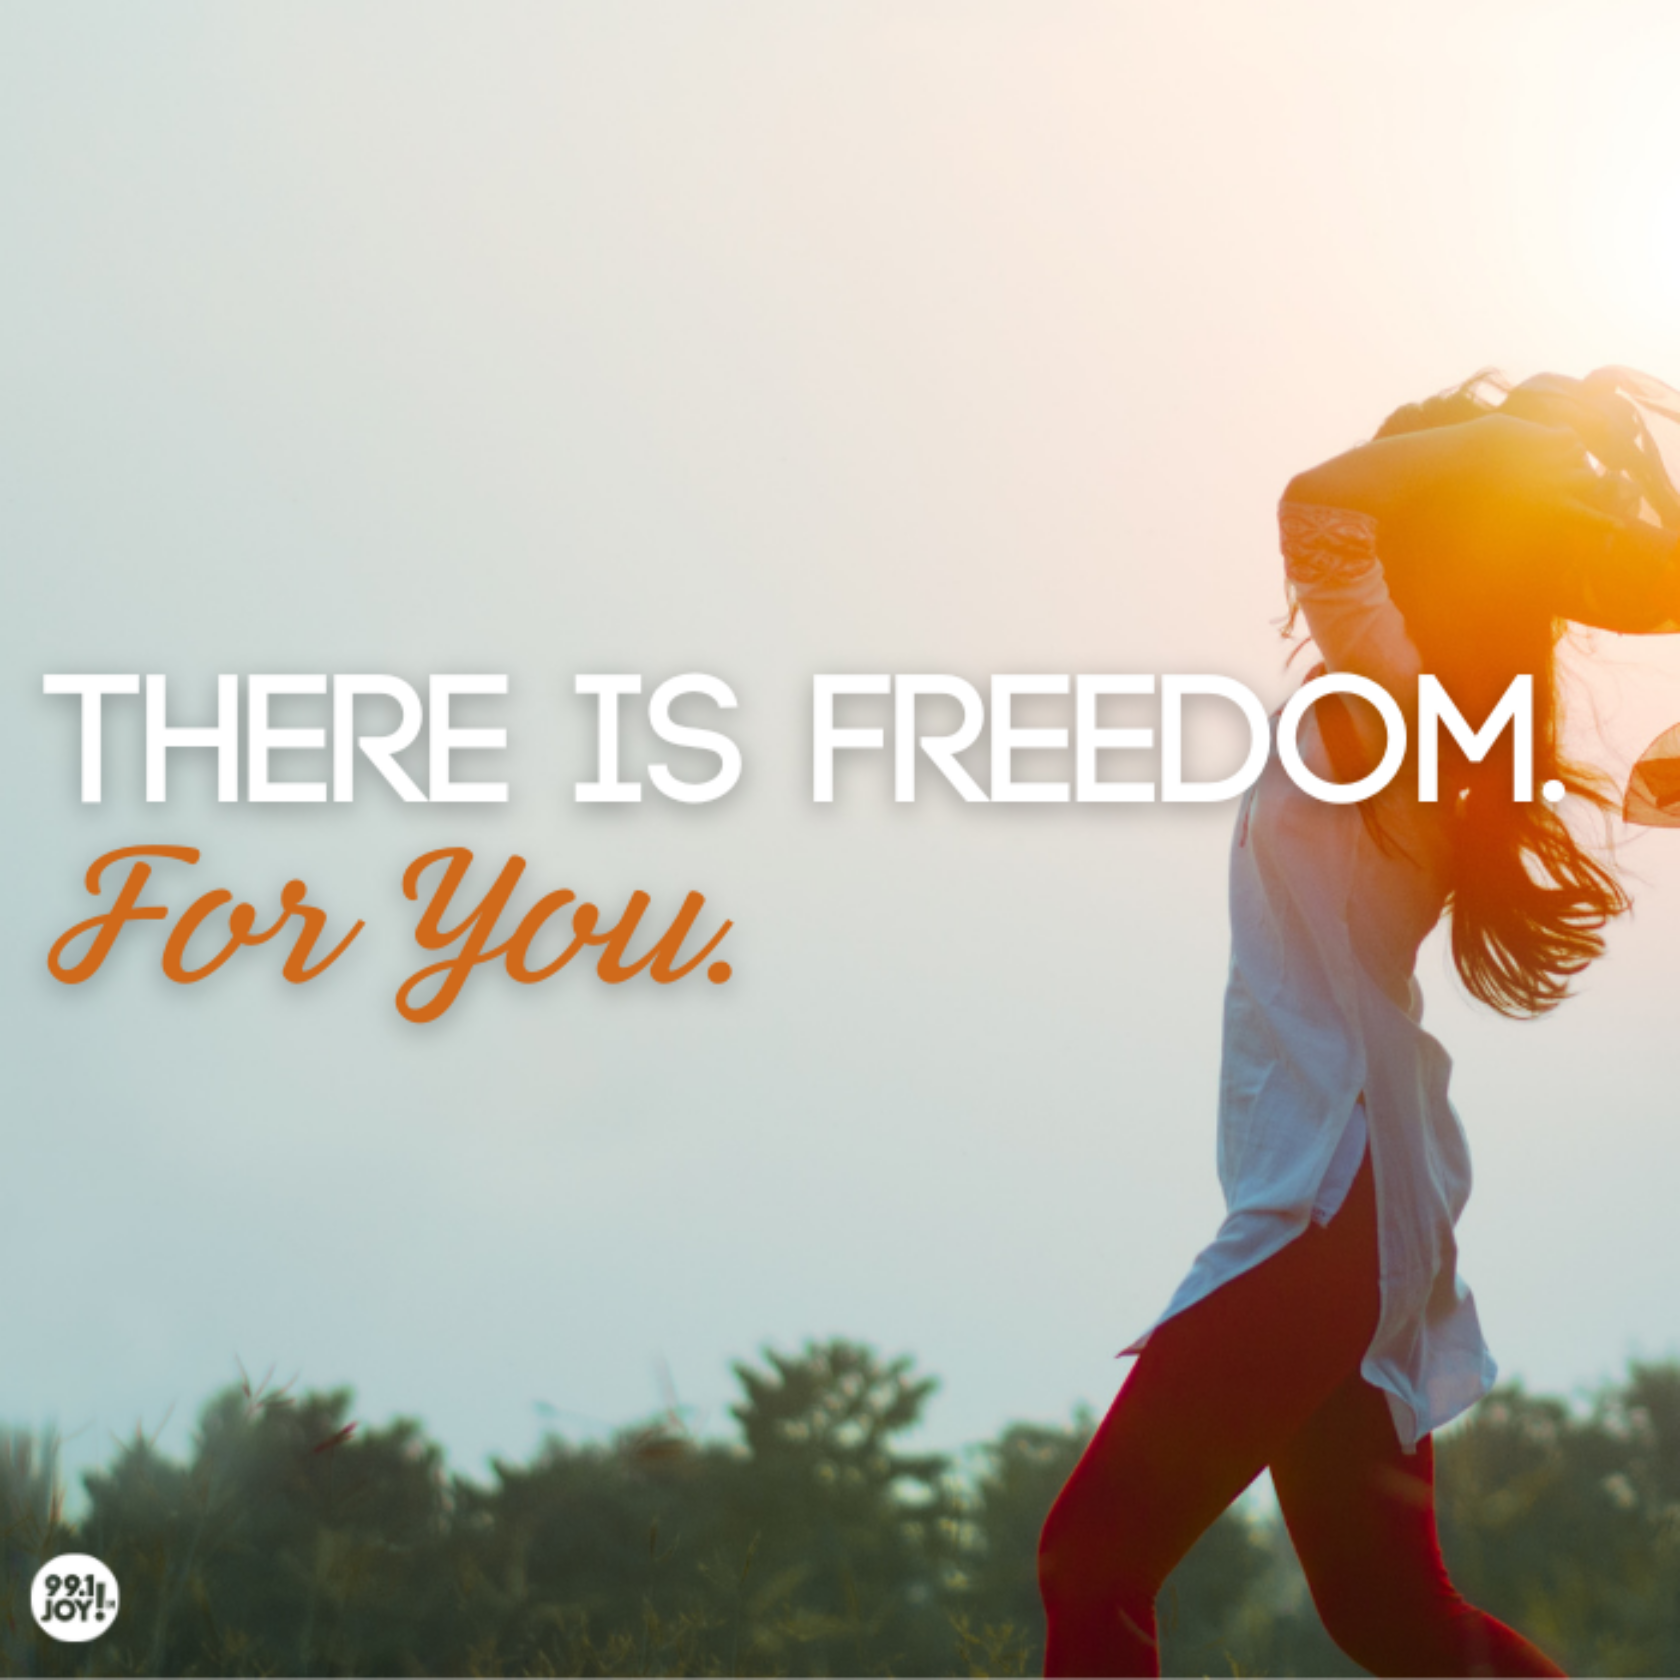 There Is Freedom. For You.